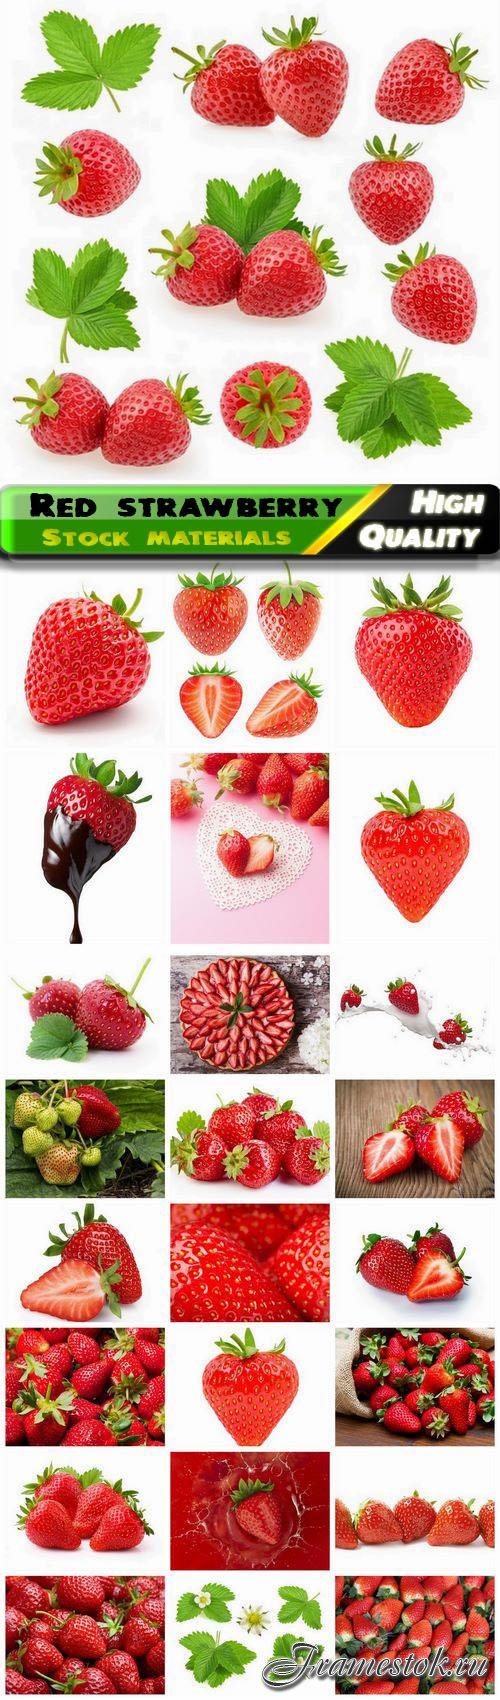 Red ripe strawberry healthy food and fruits with vitamins 25 HQ Jpg